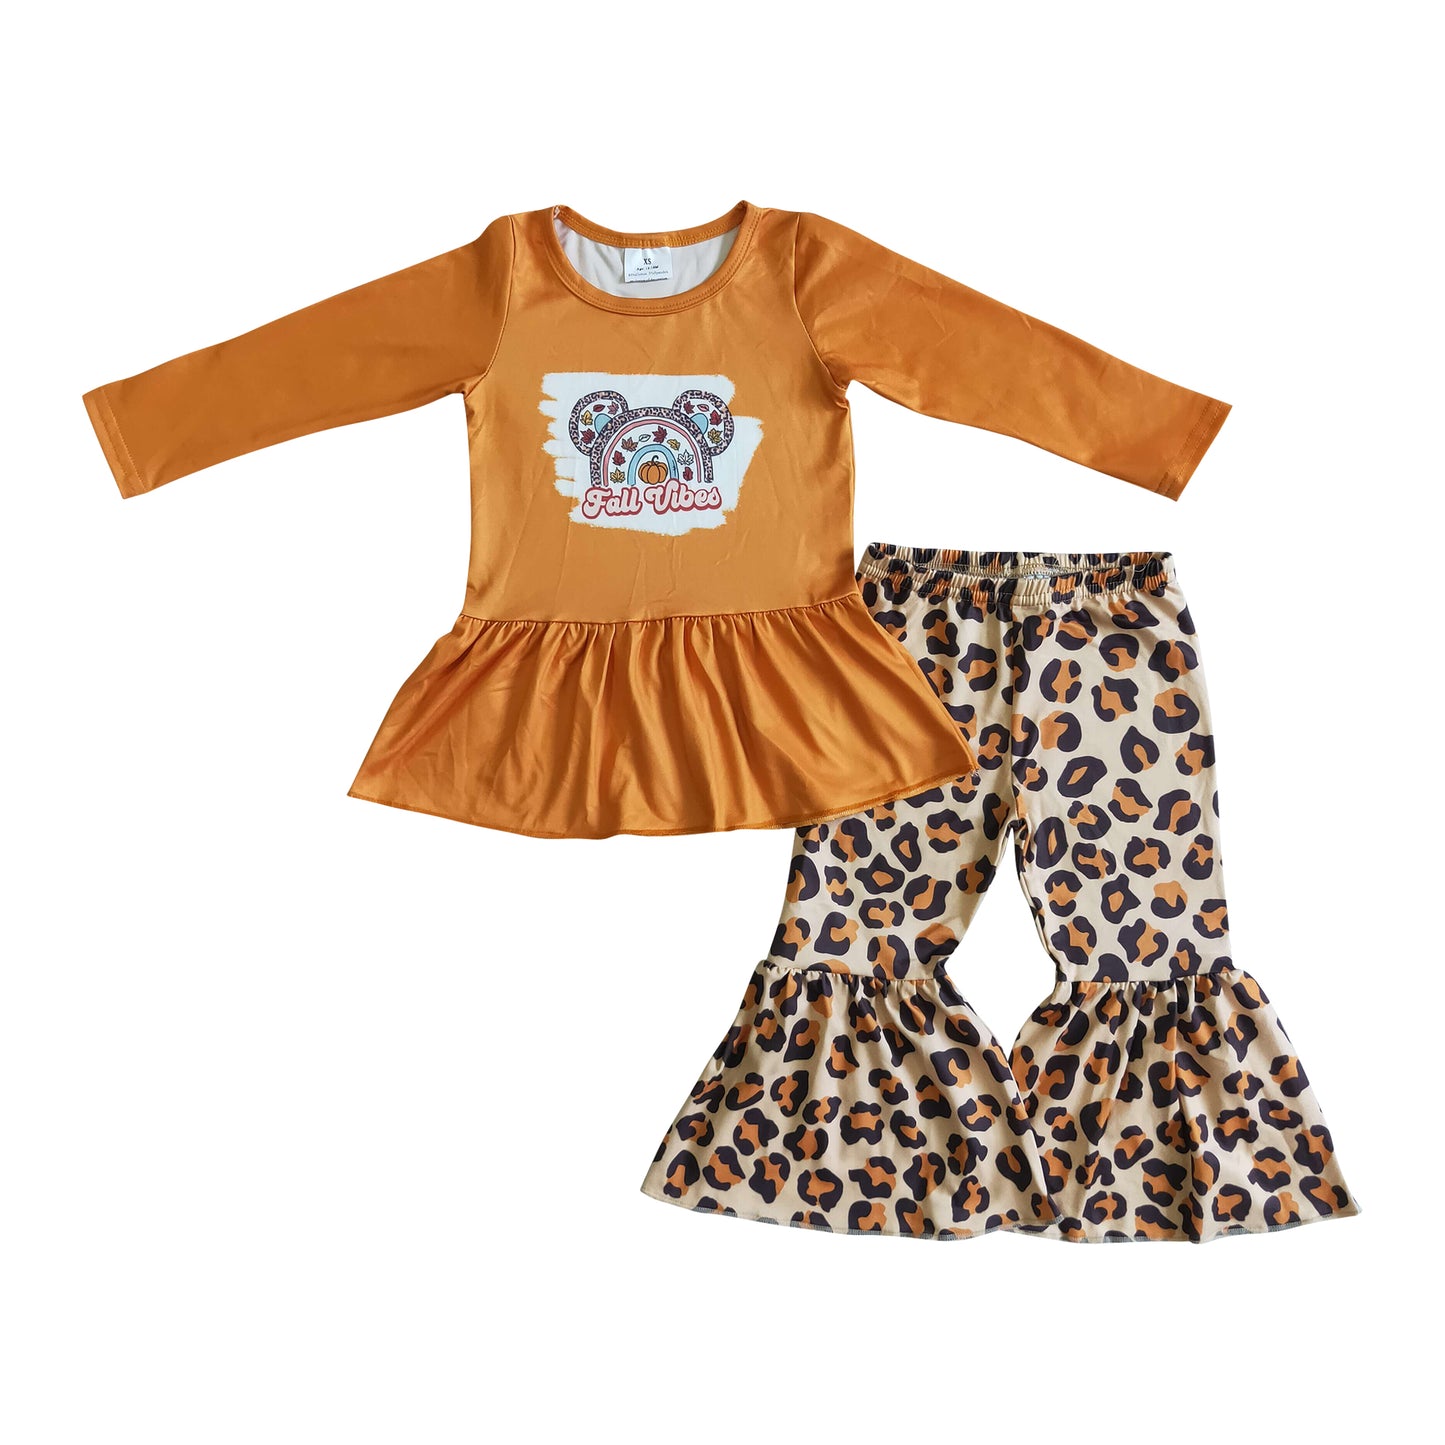 girl's outfit fall vibes orange top ruffle pants set